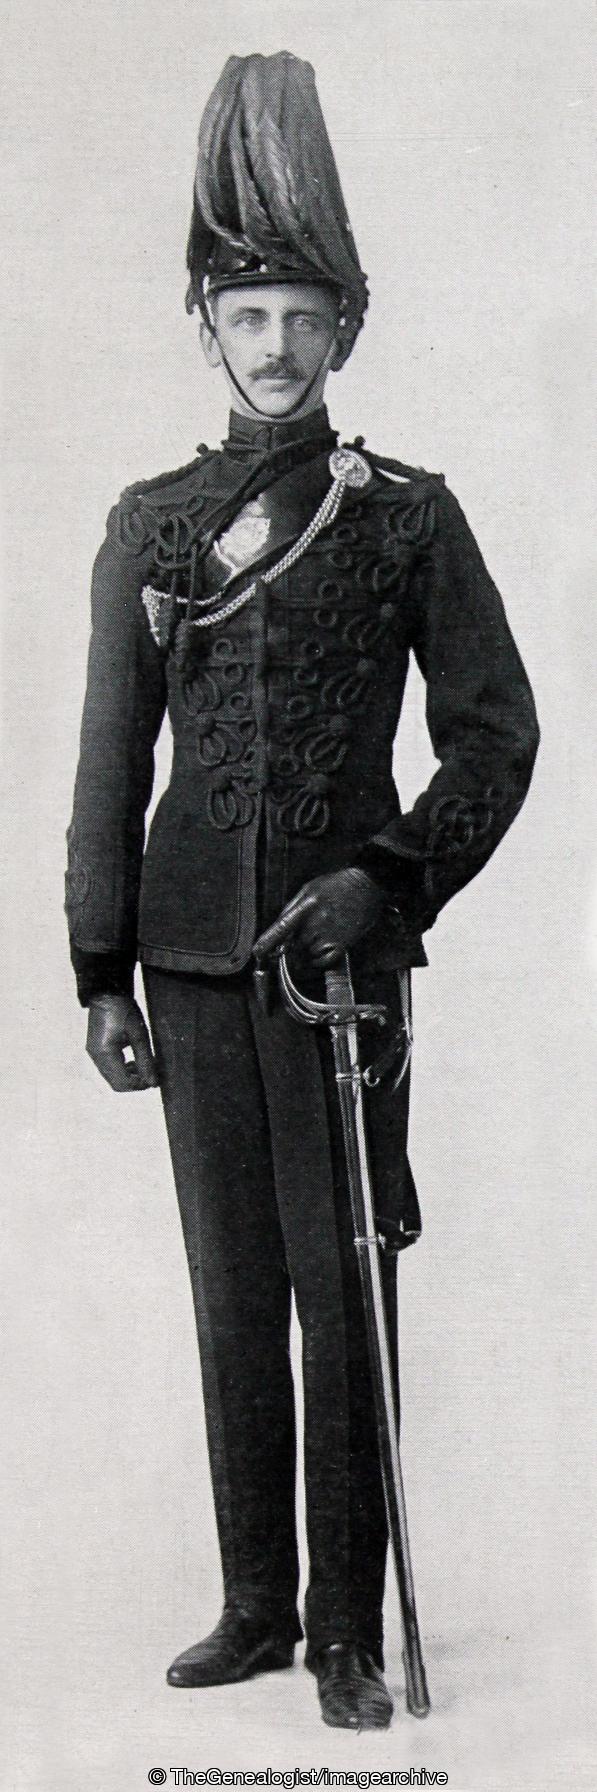 Officer in Review Order 1914 (1914, 5th Battalion, London Regiment, London Rifle Brigade, Officers, Uniform)